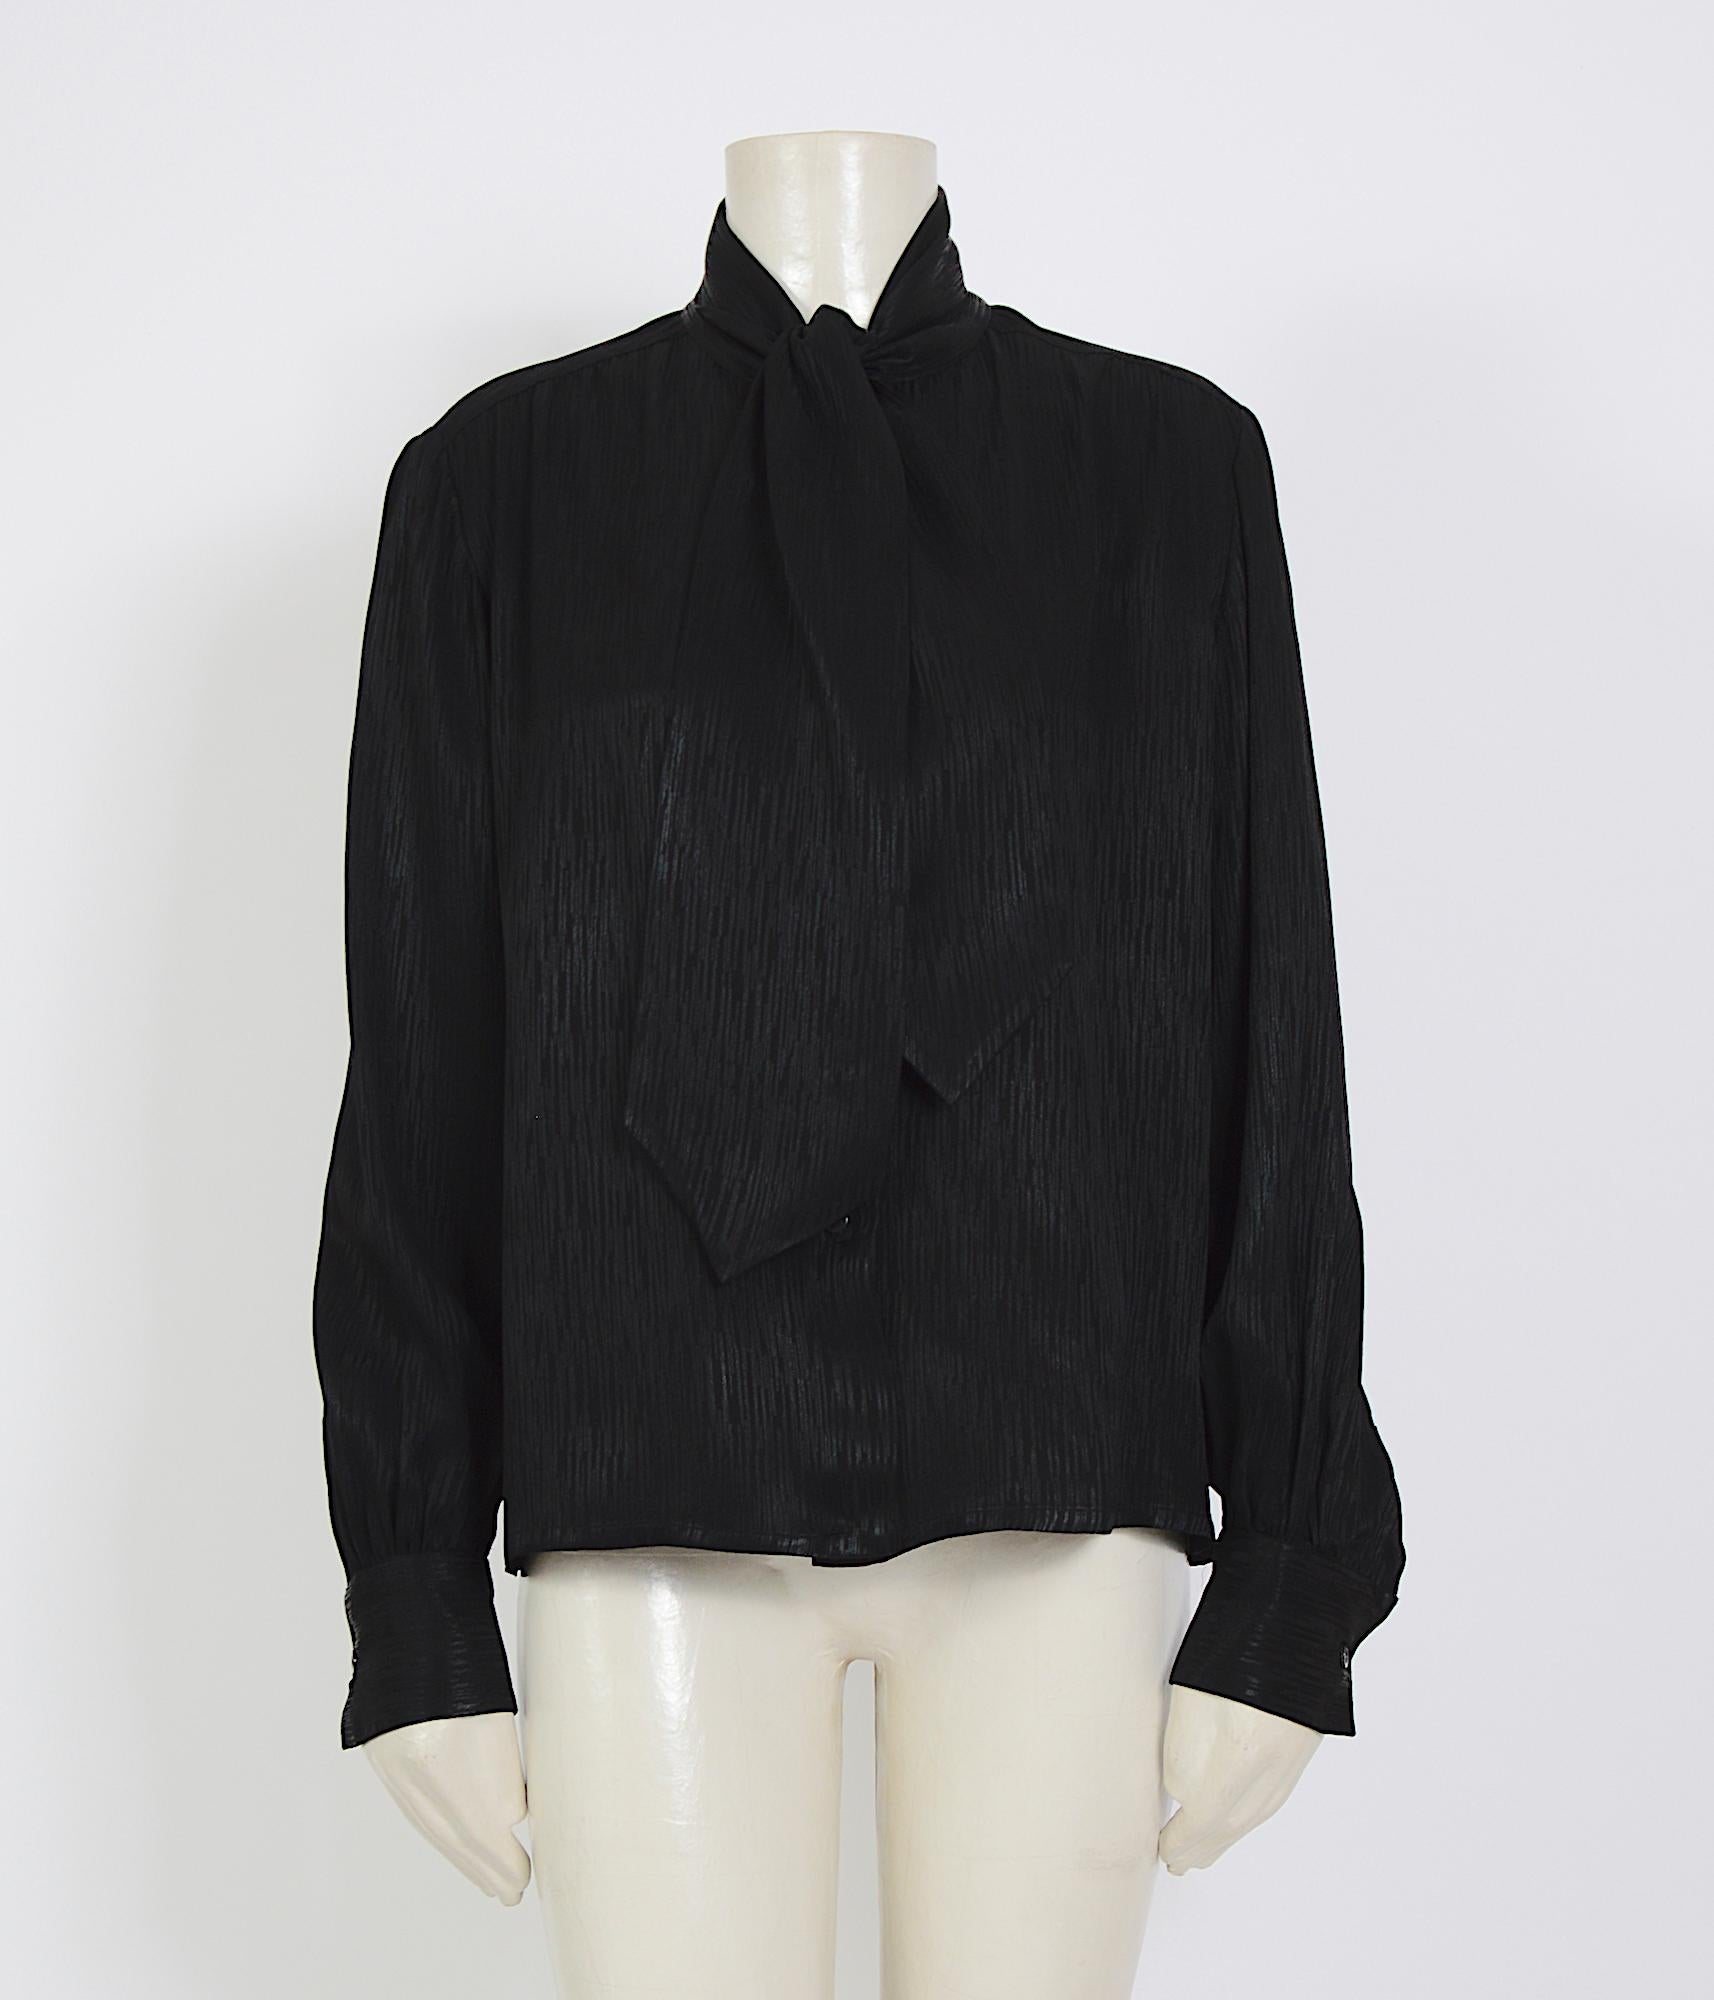 Vintage 1970s YSL jet-black structured weave (pic 8) design heavy silk attached scarf or tie blouse - shirt
Sh to Sh 16,5inch/42cm - Ua to Ua 20,5inch/52cm(x2) - Waist 19,5inch/549cm(x2) - Sleeve 24inch/61cm - Total Length 24inch/61cm

